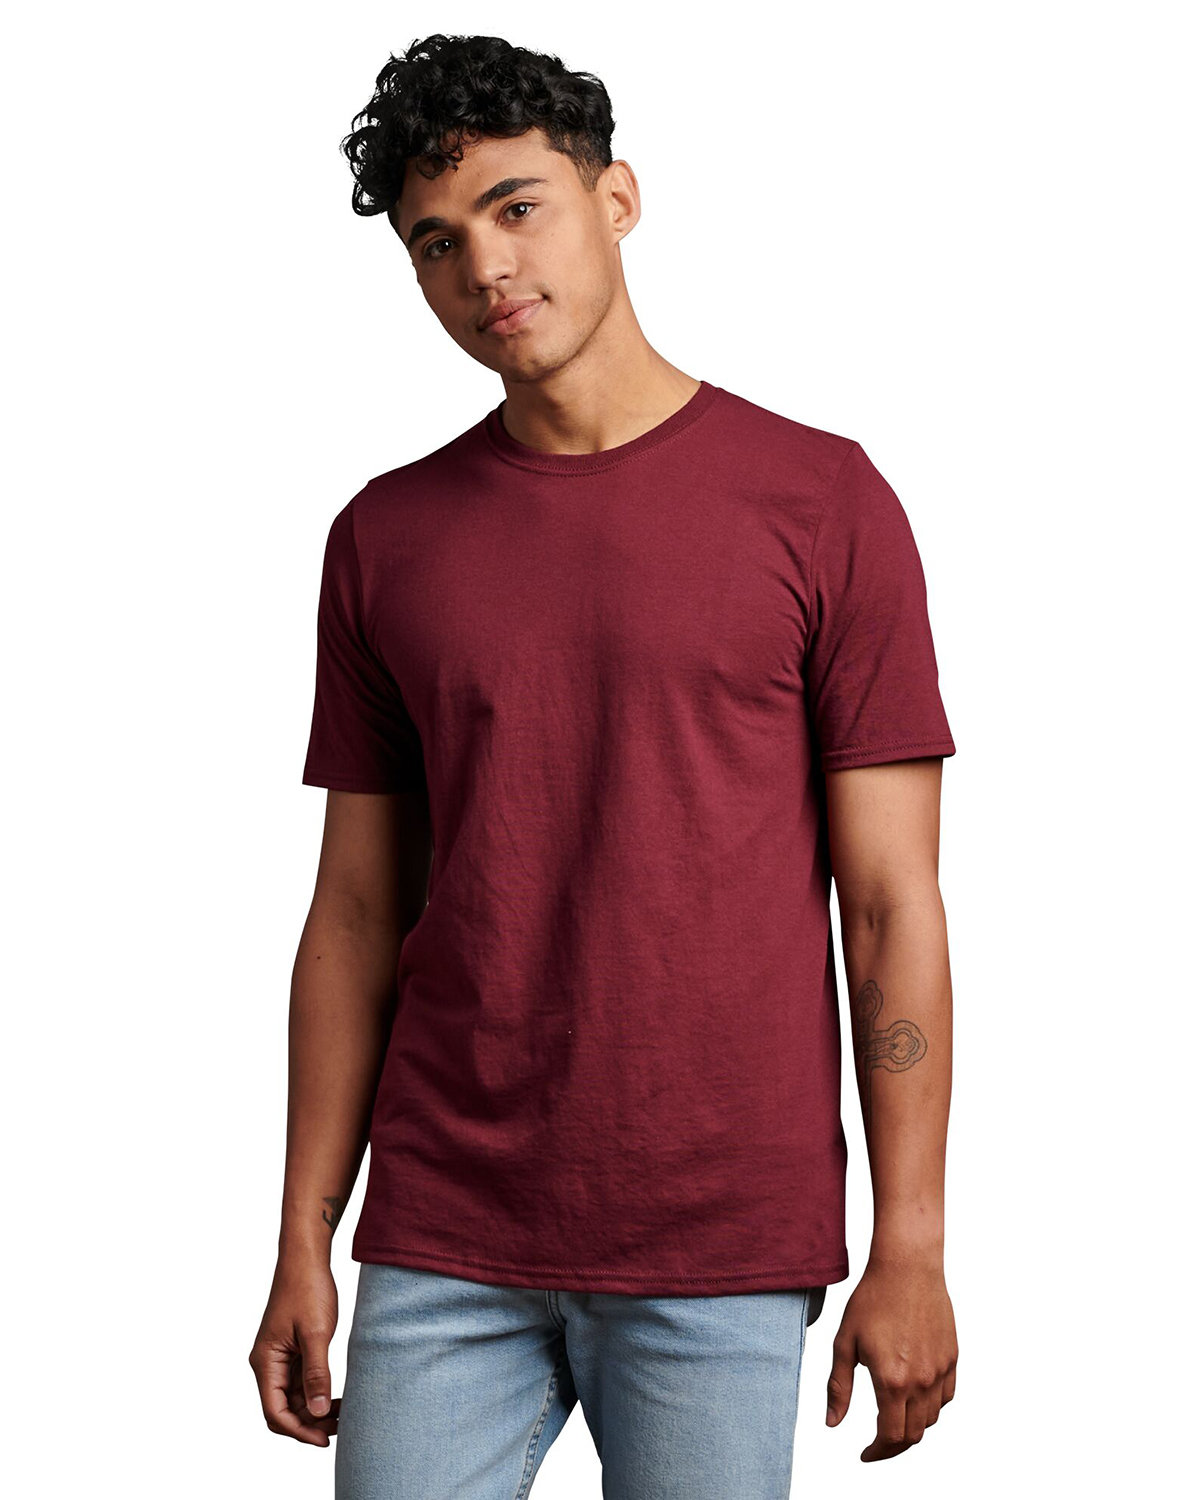 Russell Athletic Unisex Essential Performance T-Shirt MAROON 